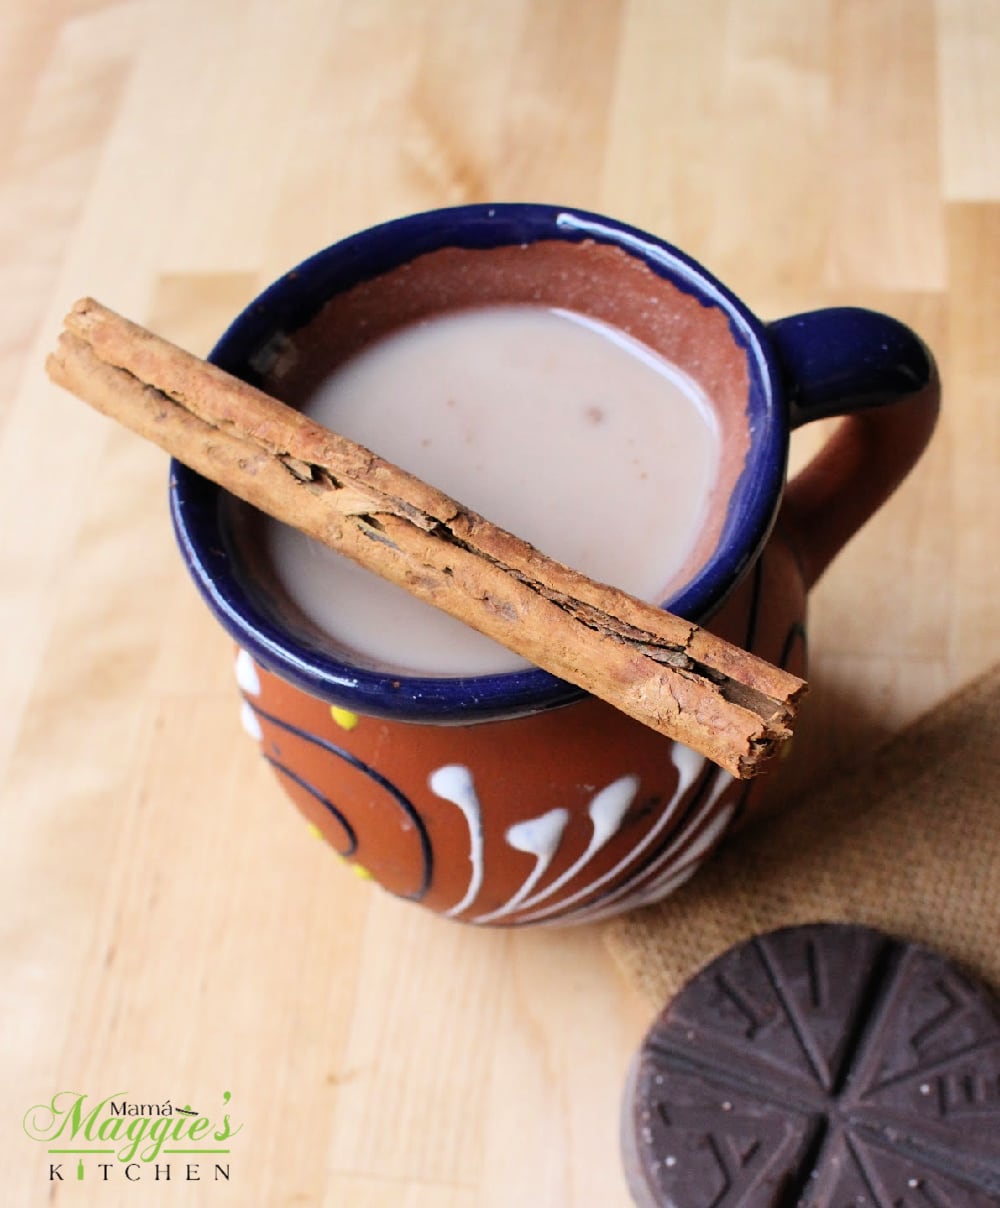 Champurrado in a decorative Mexican clay cup topped with a cinnamon stick next to a tablet of Mexican chocolate.